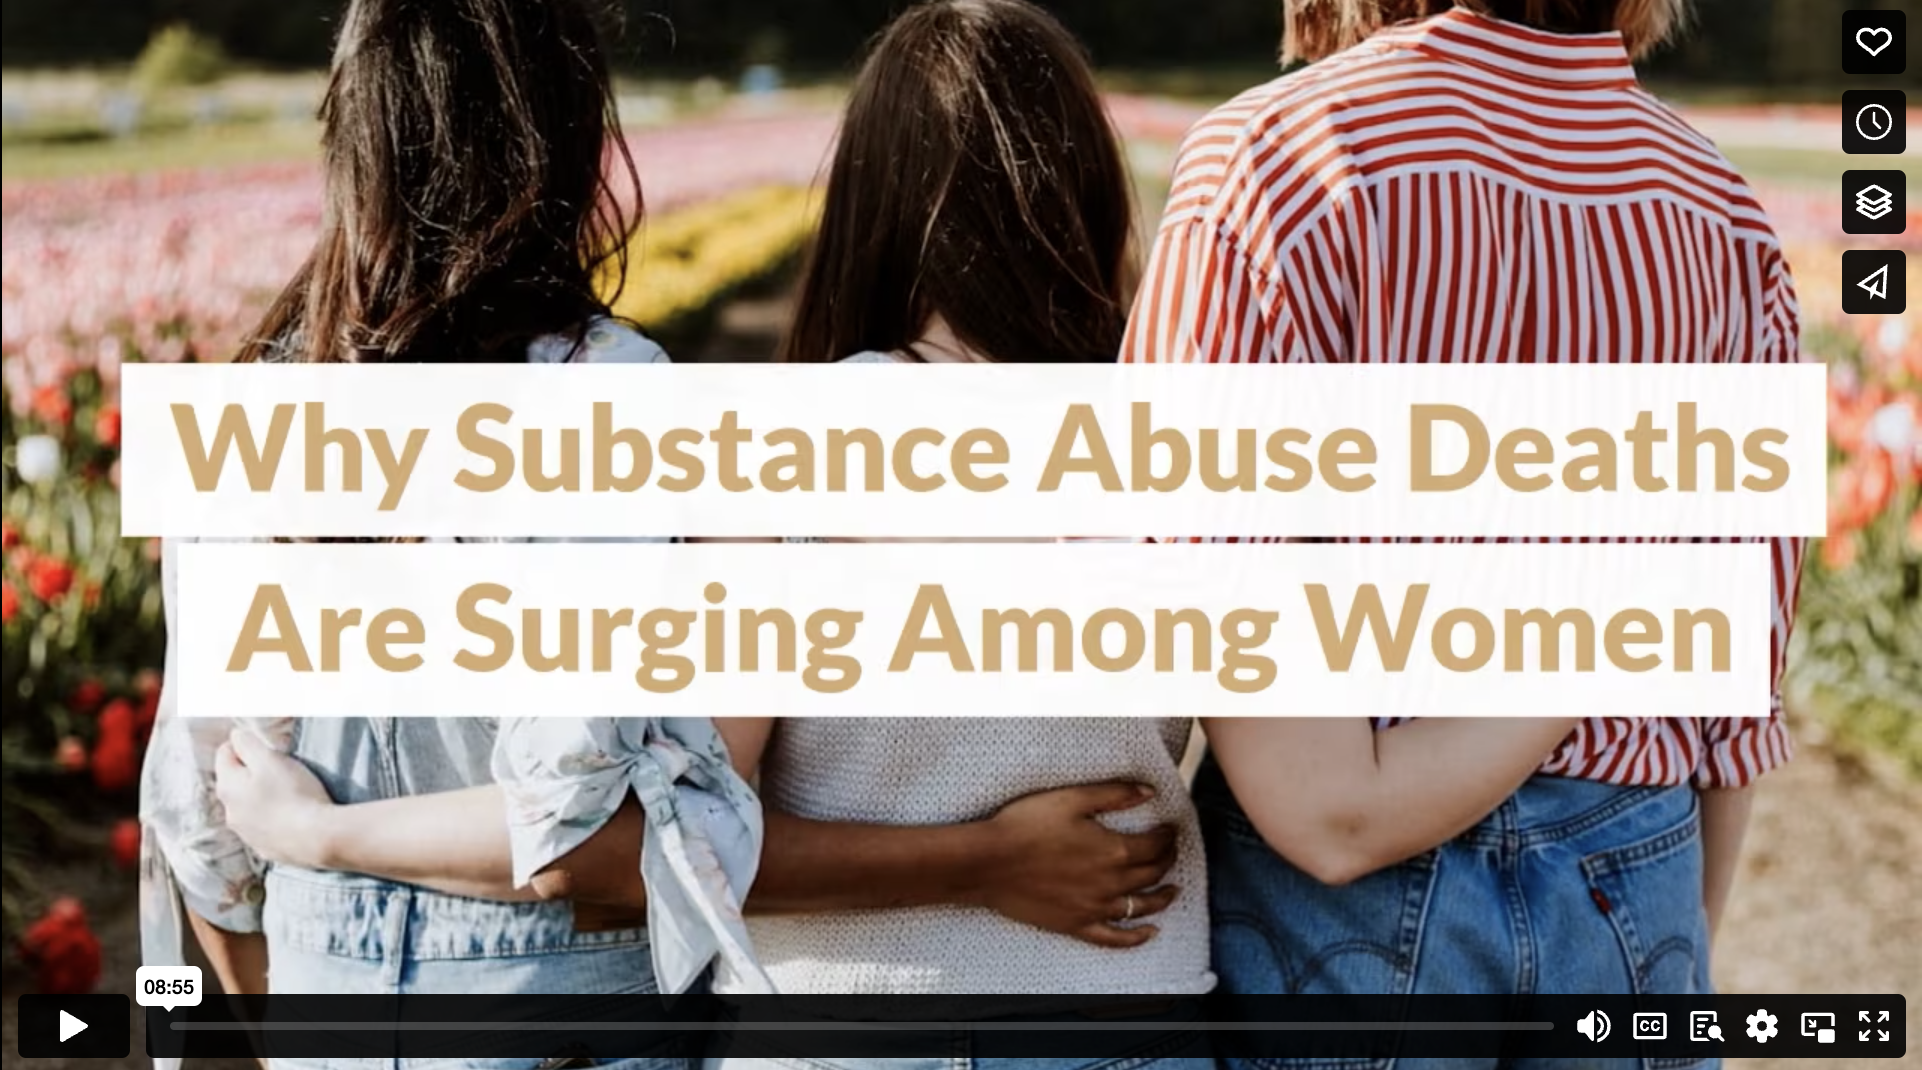 Why Substance Abuse Deaths Are Surging Among Women